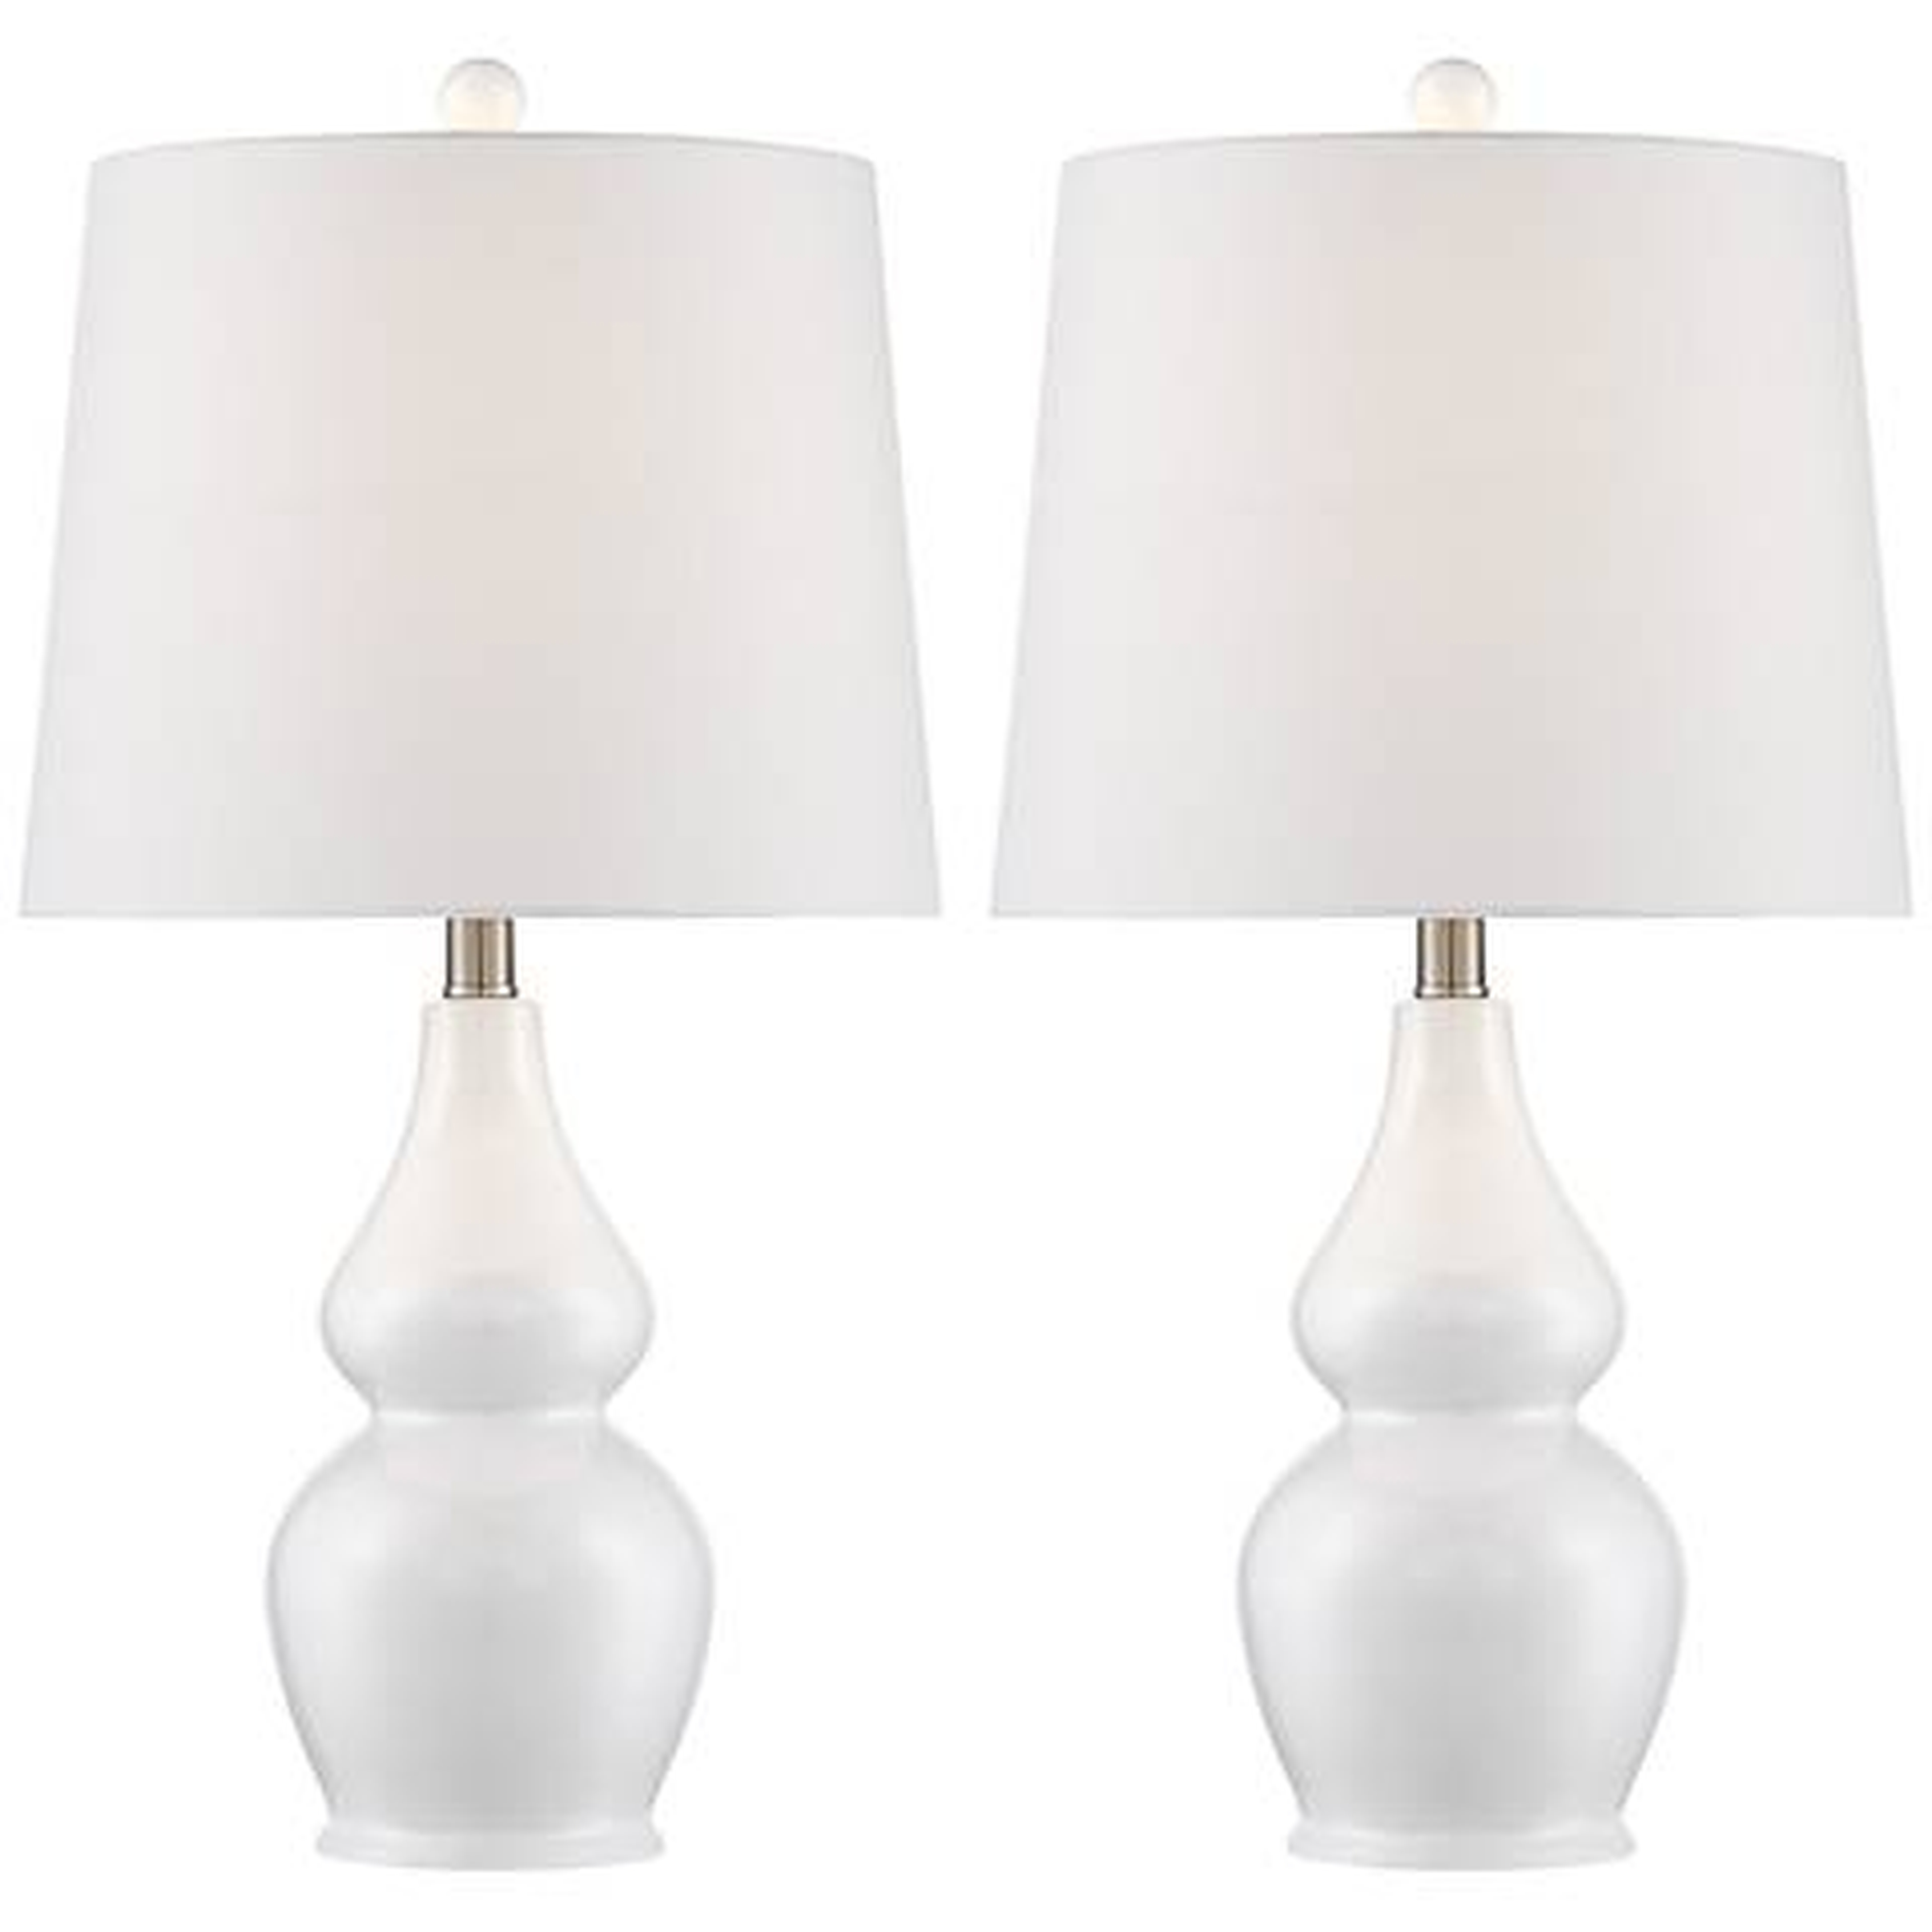 Jane White Ceramic Double Gourd Table Lamp Set of 2 - Lamps Plus